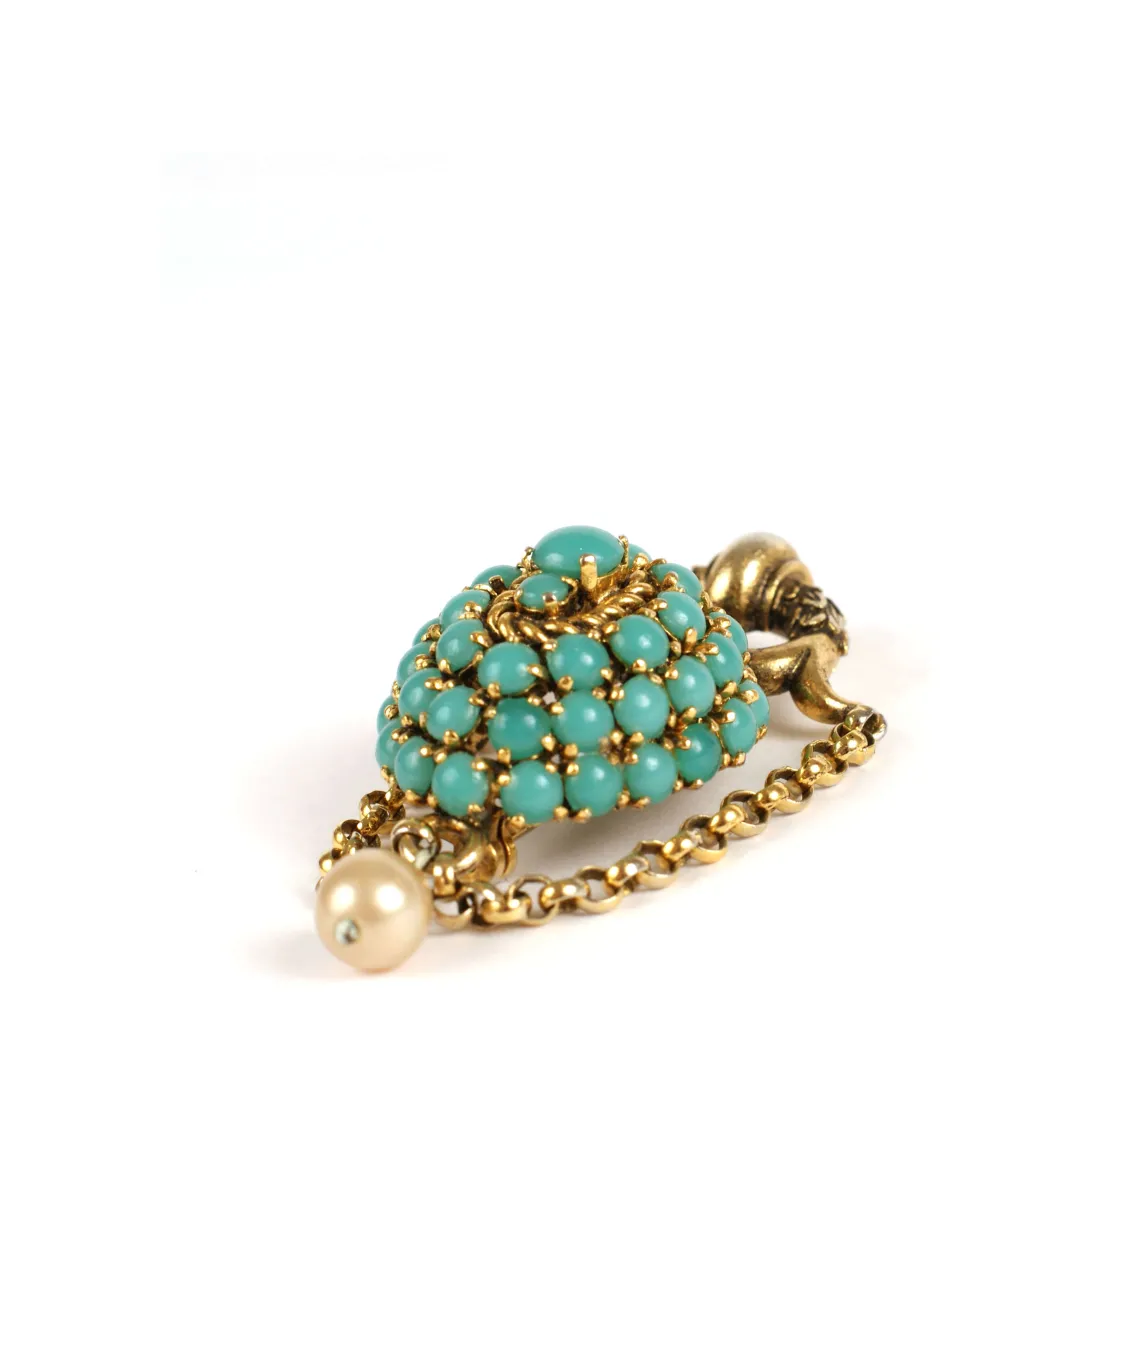 Turquoise and pearl vintage Dior brooch